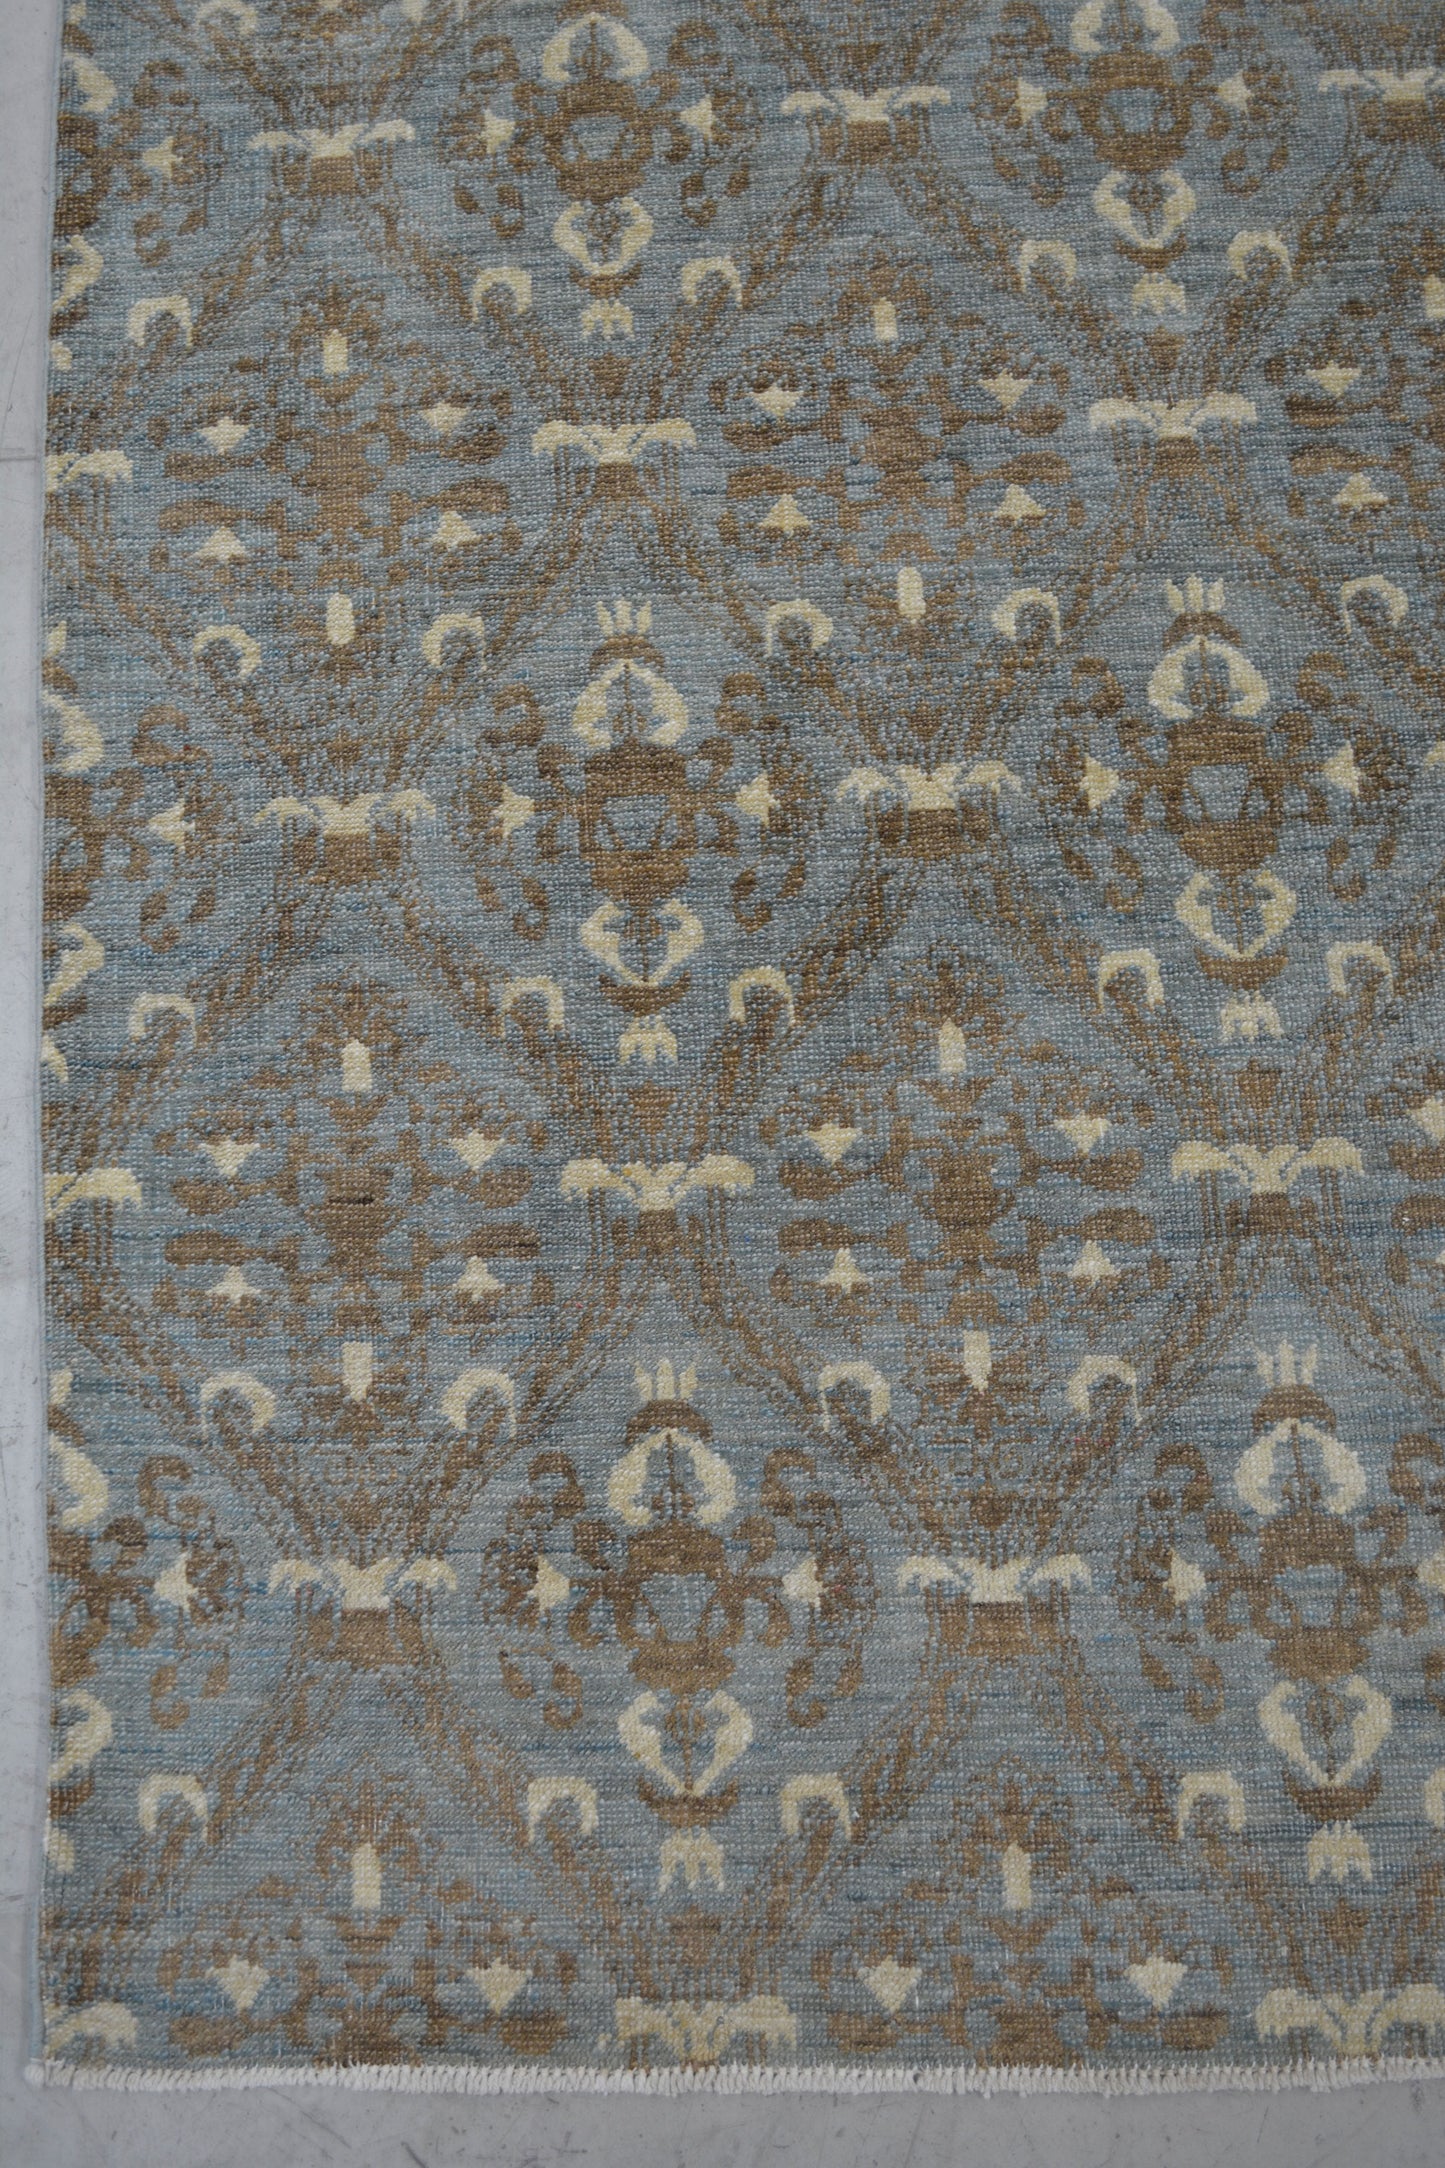 For the entire perimeter, this rug does not come with any borders or frames in the design. 